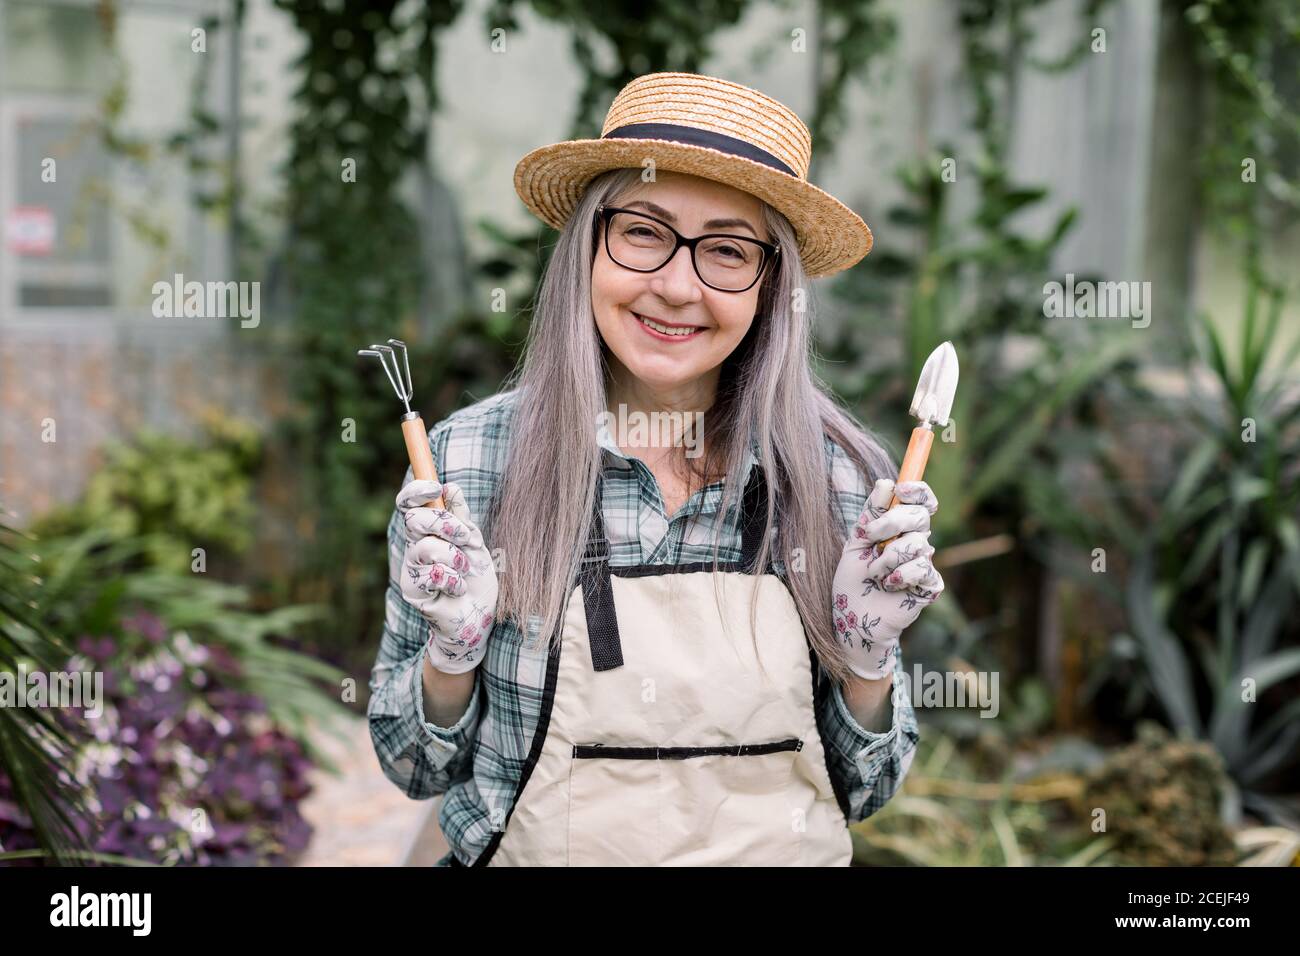 Portrait of senior gray haired woman gardener in checkered shirt, apron and straw hat, posing with gardening tools indoors in greenhouse on the Stock Photo